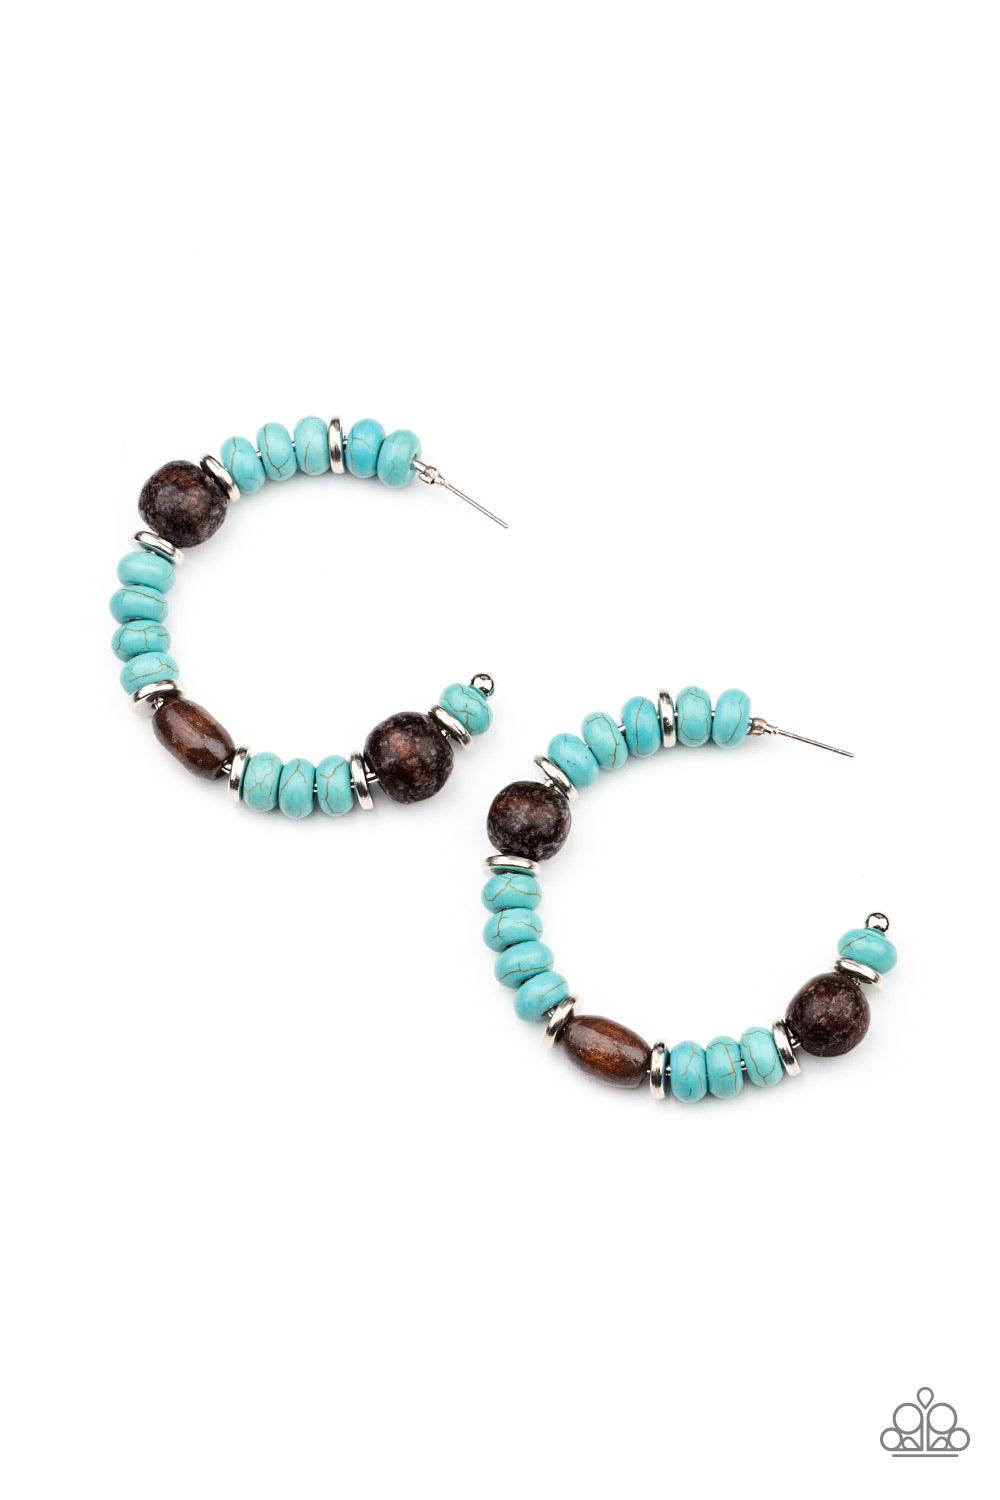 Paparazzi Accessories Definitely Down-To-Earth - Blue An earthy collection of turquoise stone beads, silver discs, and brown wooden beads are delicately threaded along a dainty wire, creating an artisan inspired hoop. Earring attaches to a standard post f